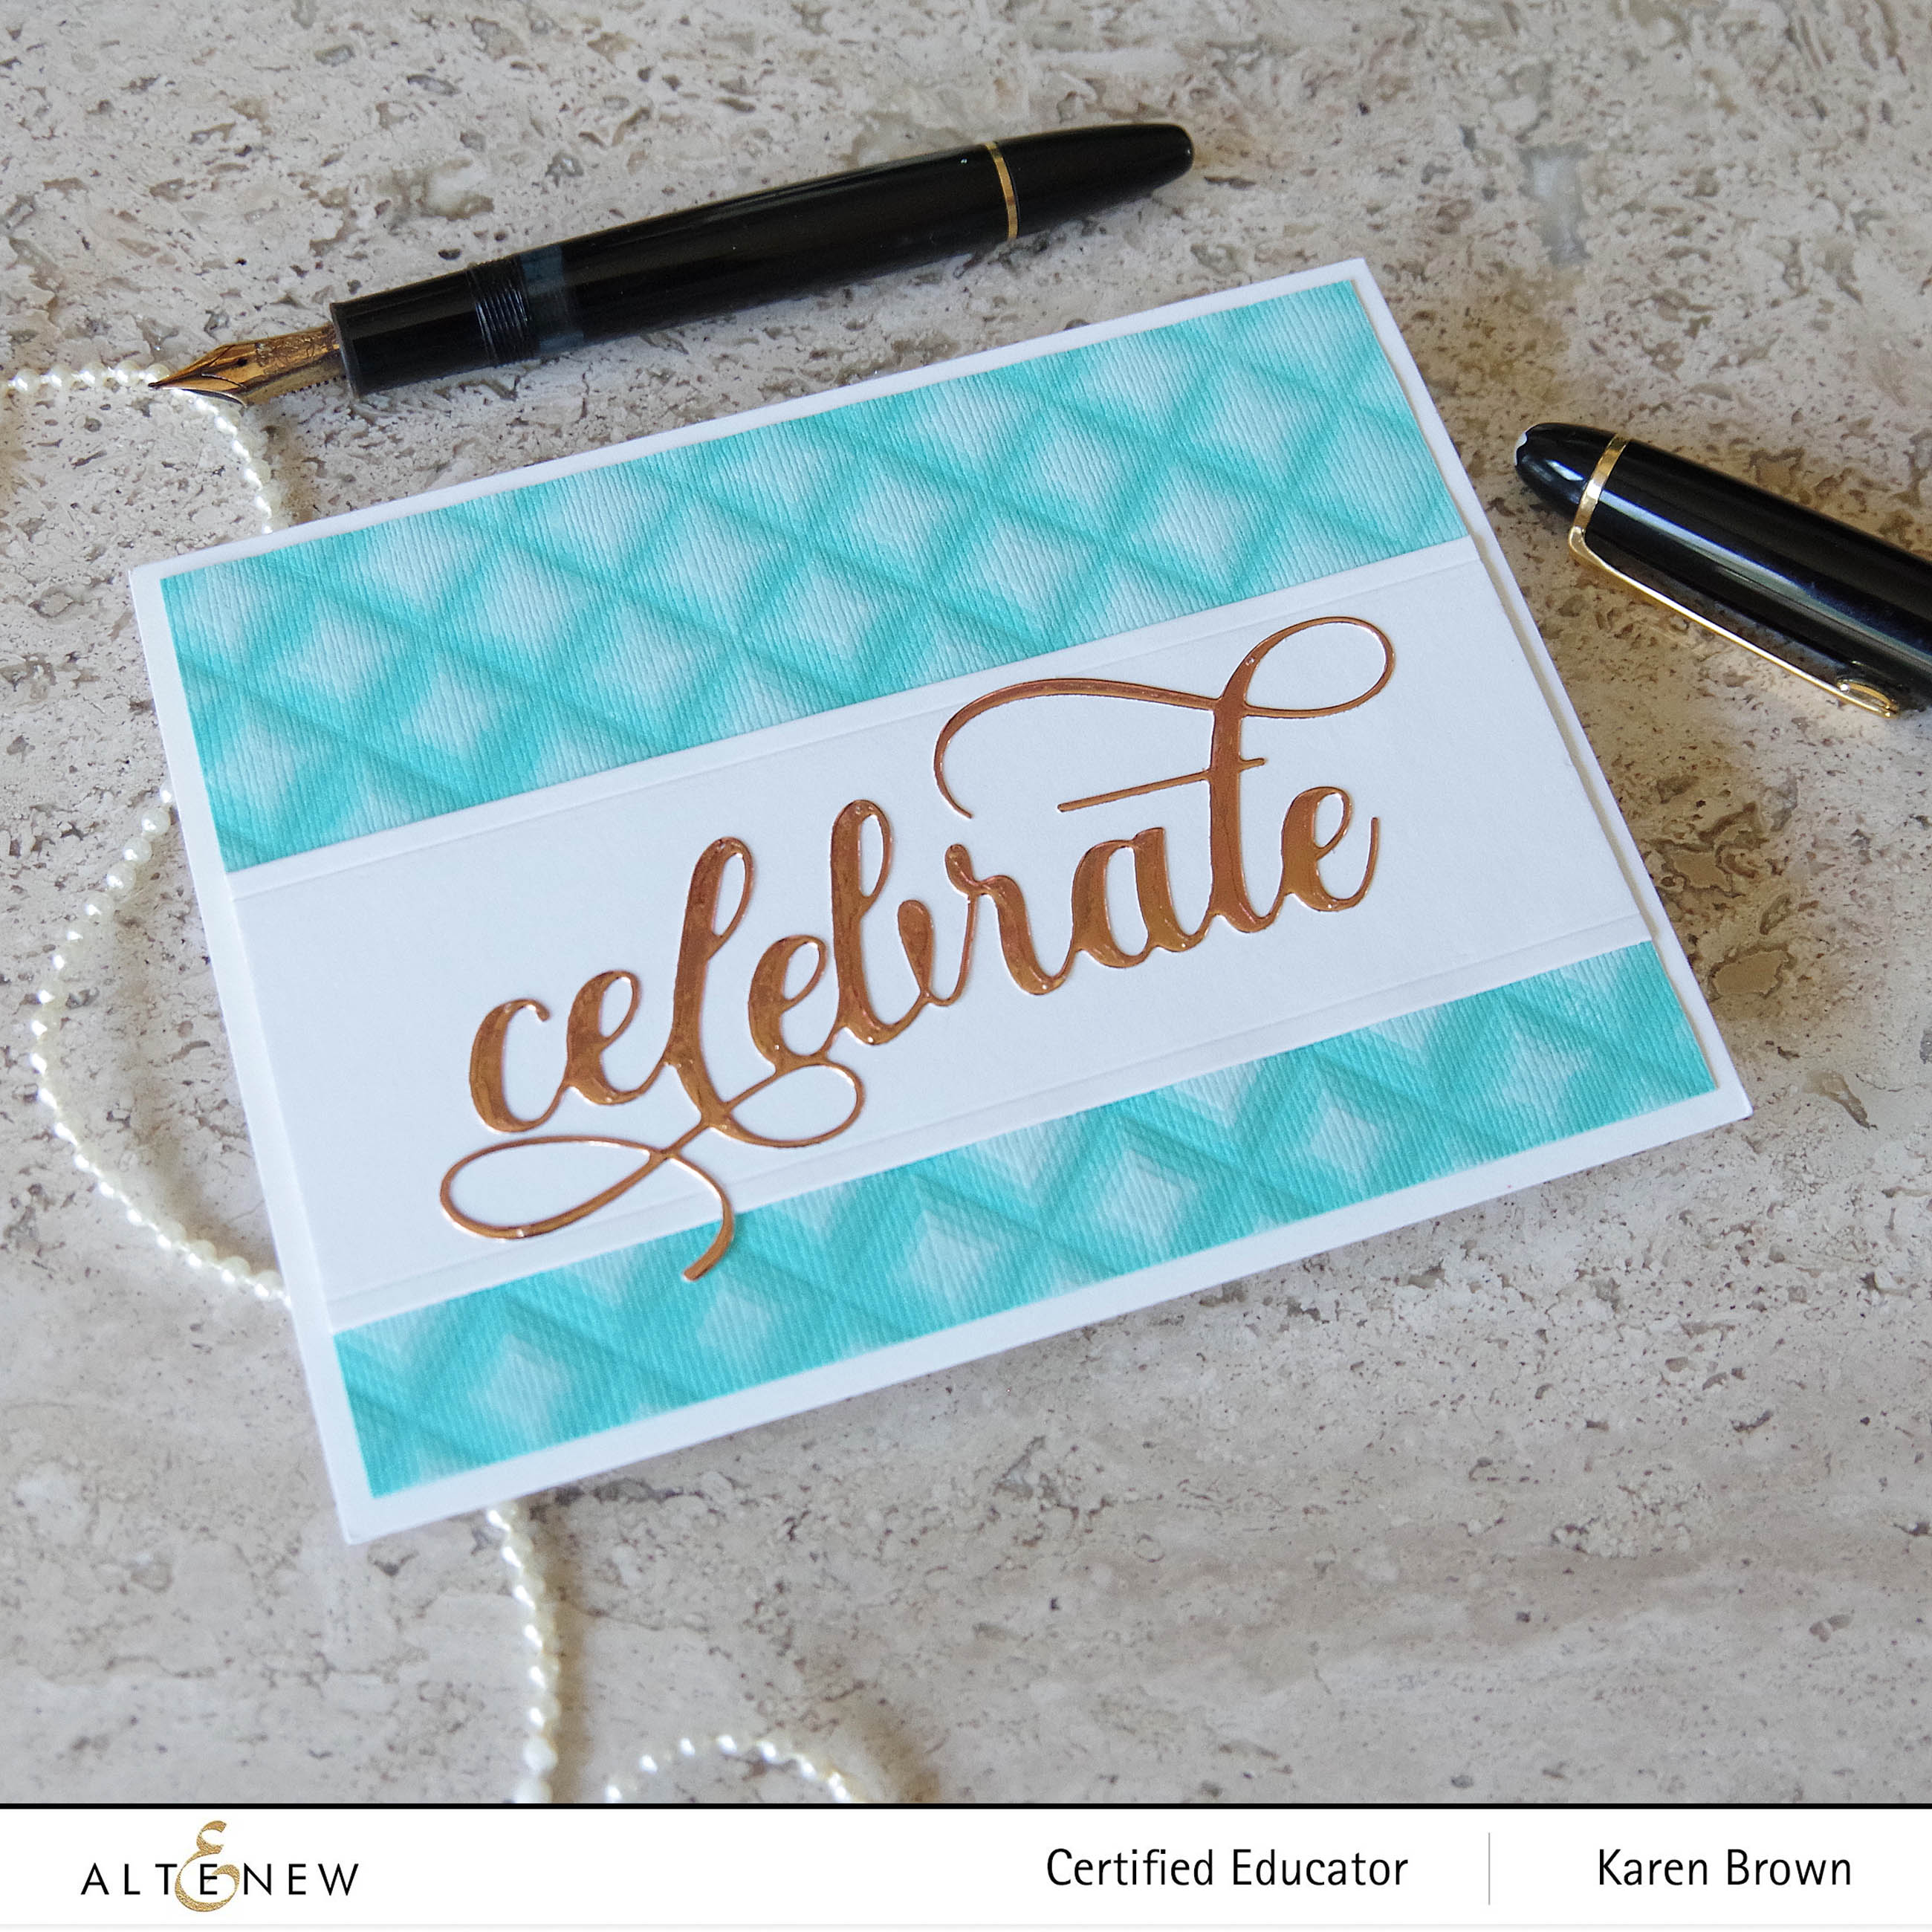 Altenew Modern Squares Embossing Folder and Fancy Celebrate die.